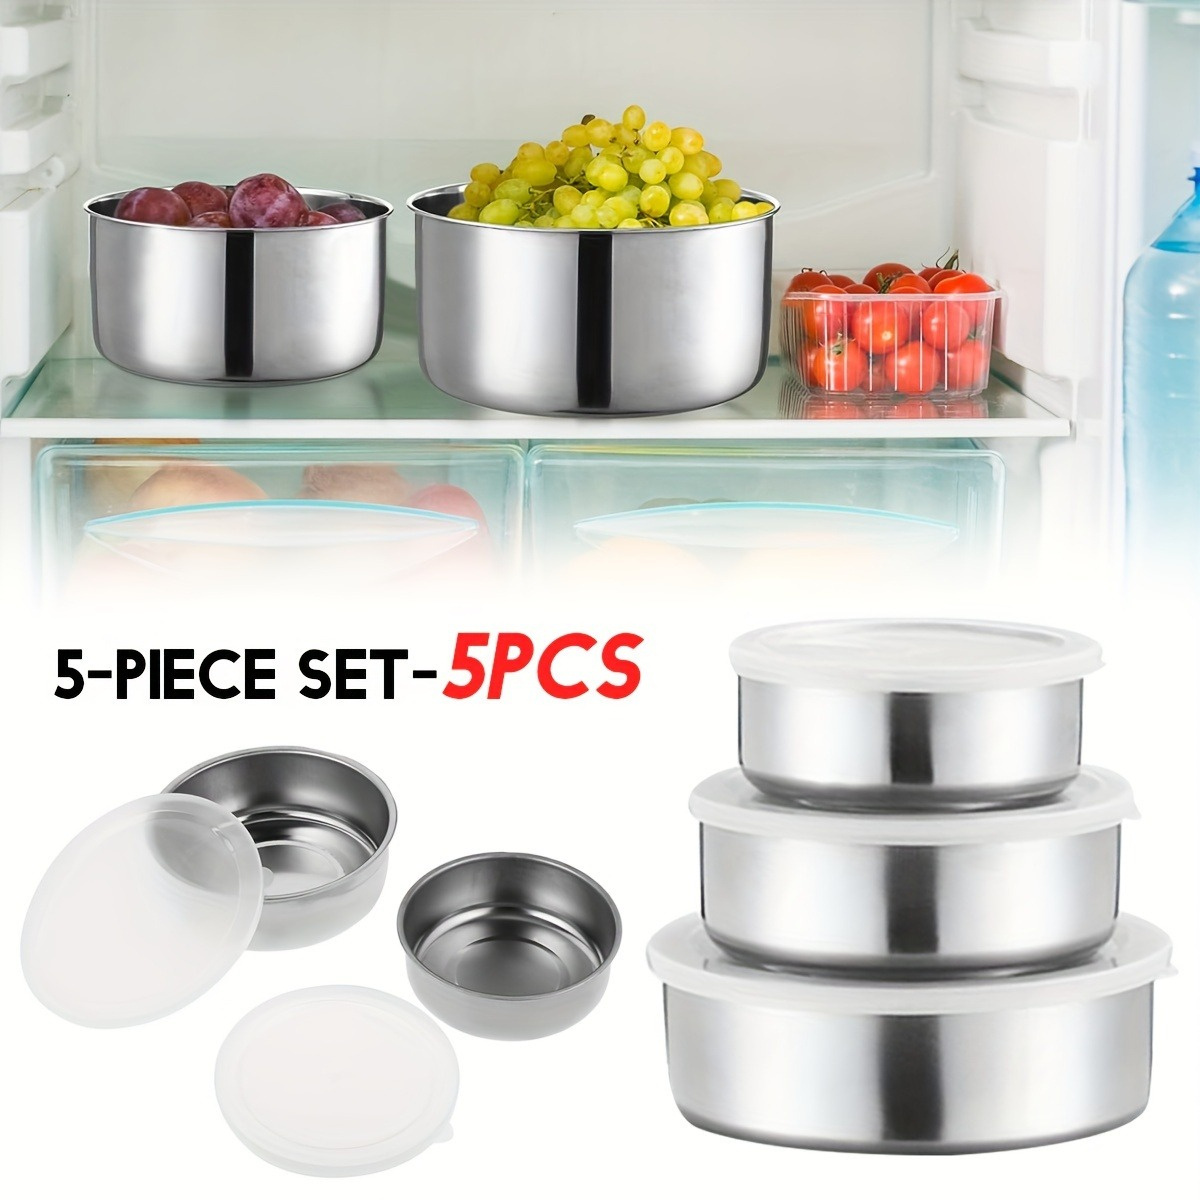 

5-piece Stainless Steel Bento Box Set With Lids - Microwave Safe, Reusable Food Storage Containers For Breakfast, Office, Bbq & Picnic - Round Sealed Freshness Bowls